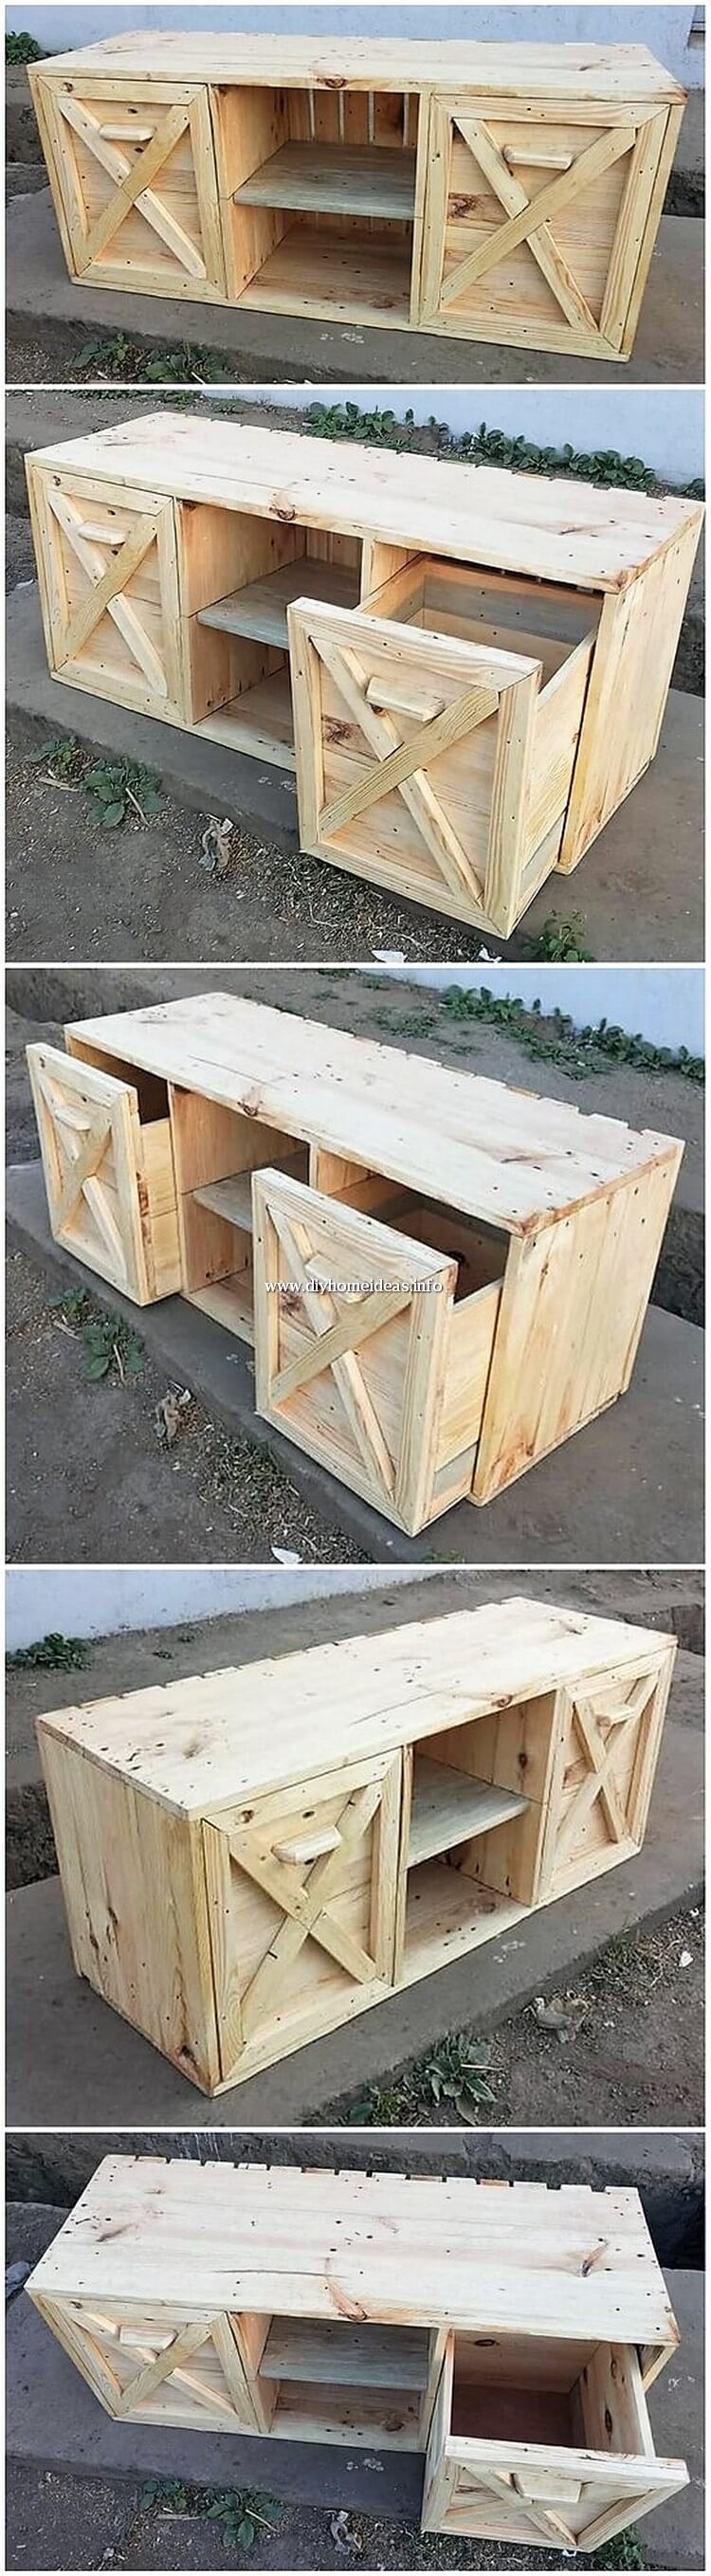 Pallet Media Table or Cabinet